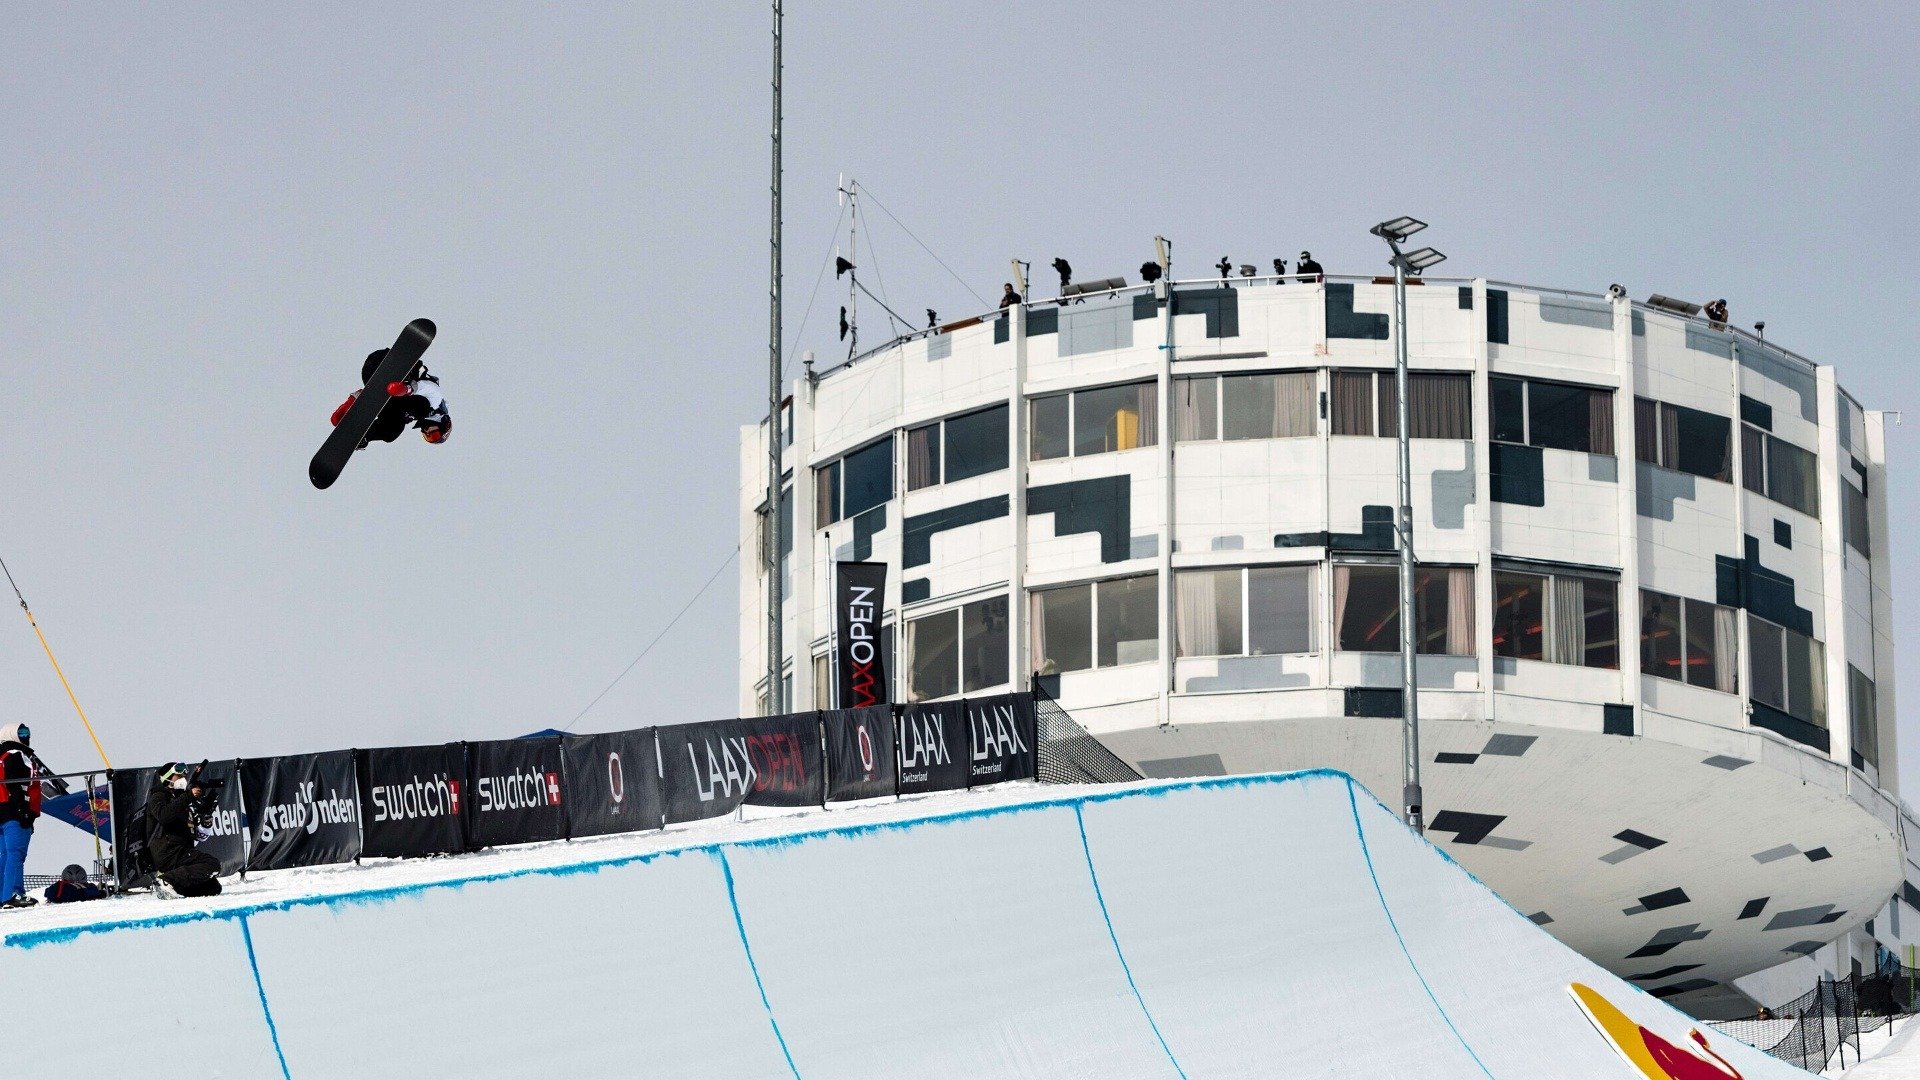 5. Drop in at X Games with Scotty James